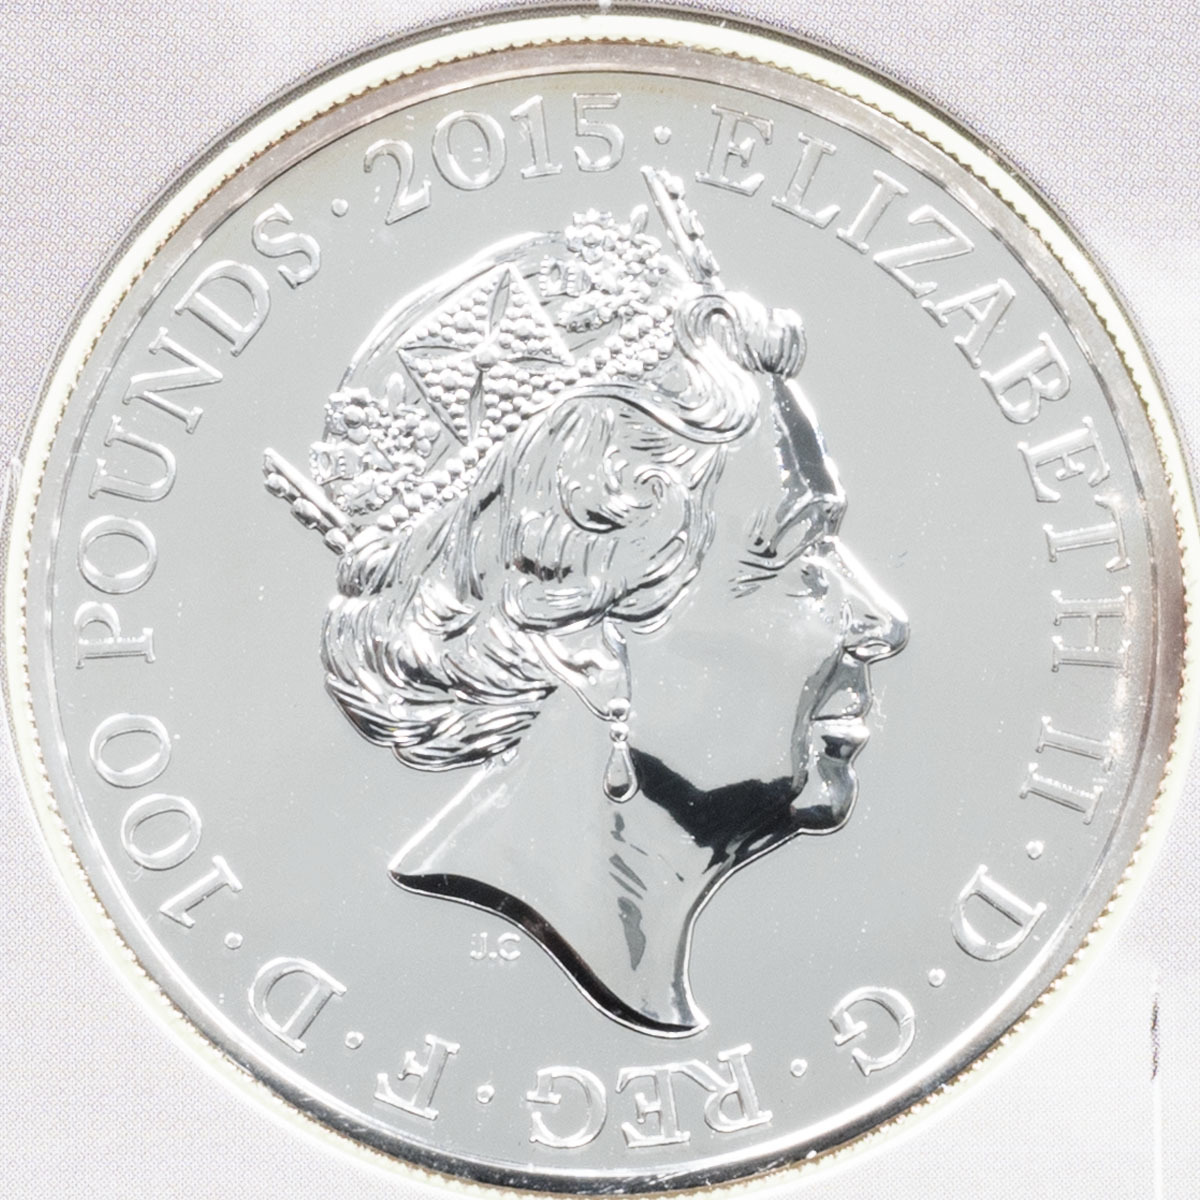 UK15100P 2015 Buckingham Palace One Hundred Pound Silver Brilliant Uncirculated Coin In Folder Obverse